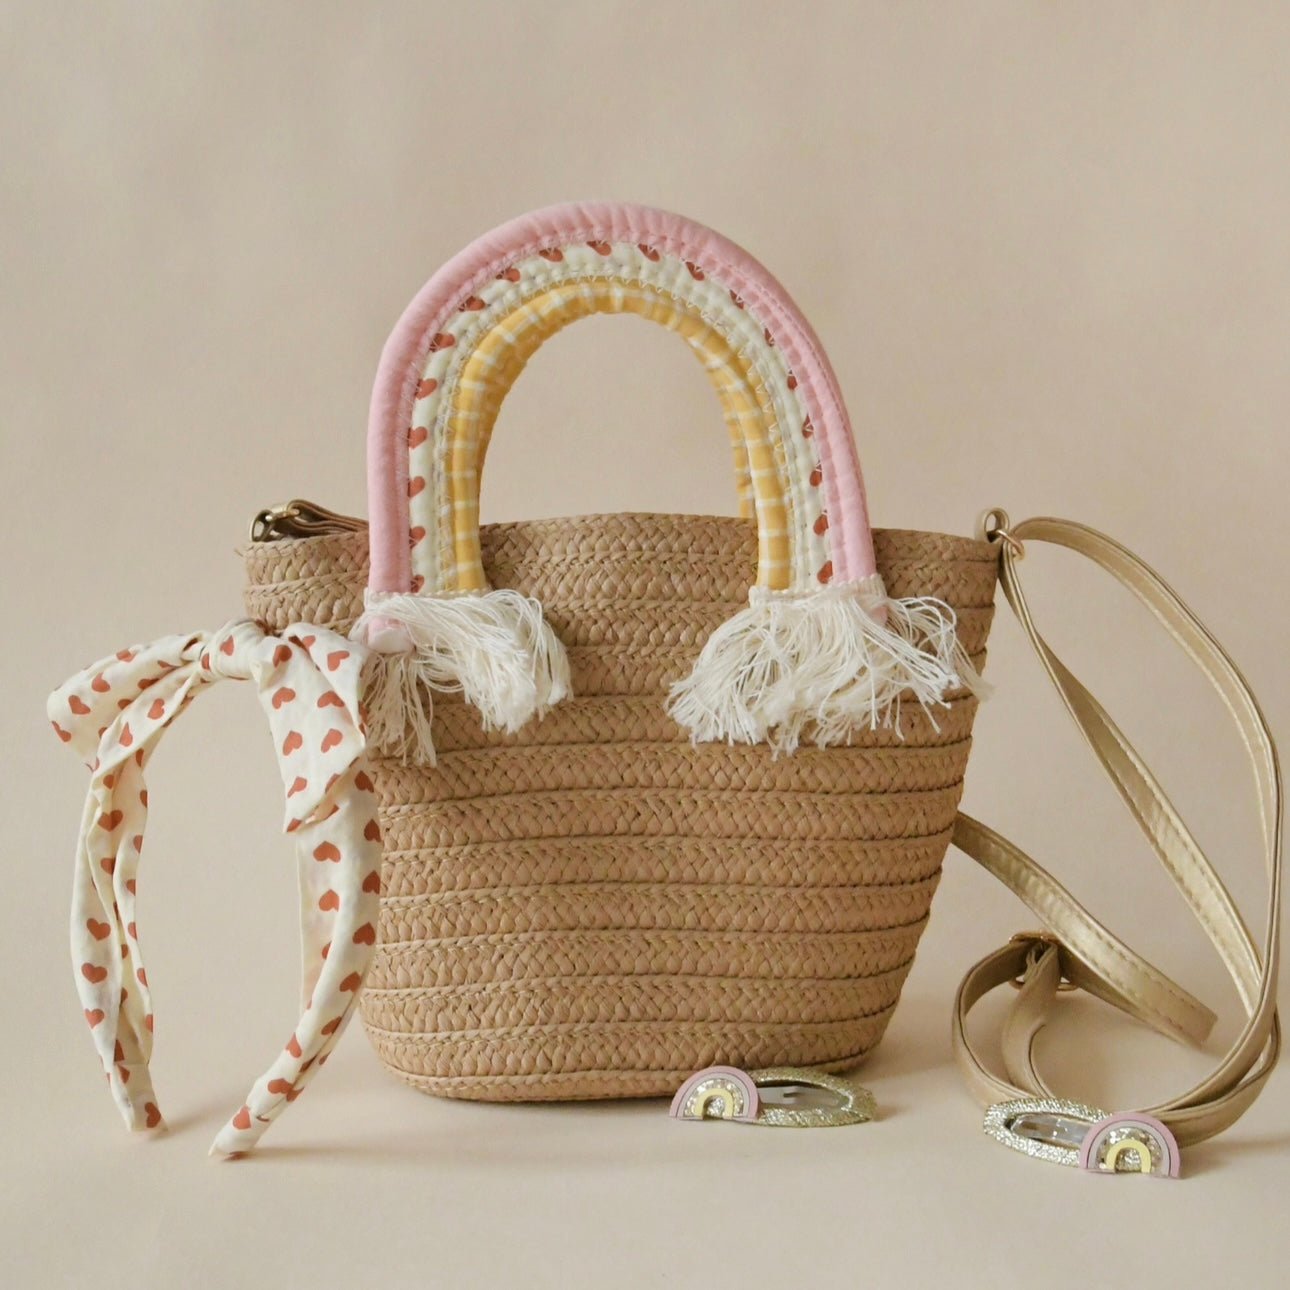 Rainbow Handle Basket find Stylish Fashion for Little People- at Little Foxx Concept Store